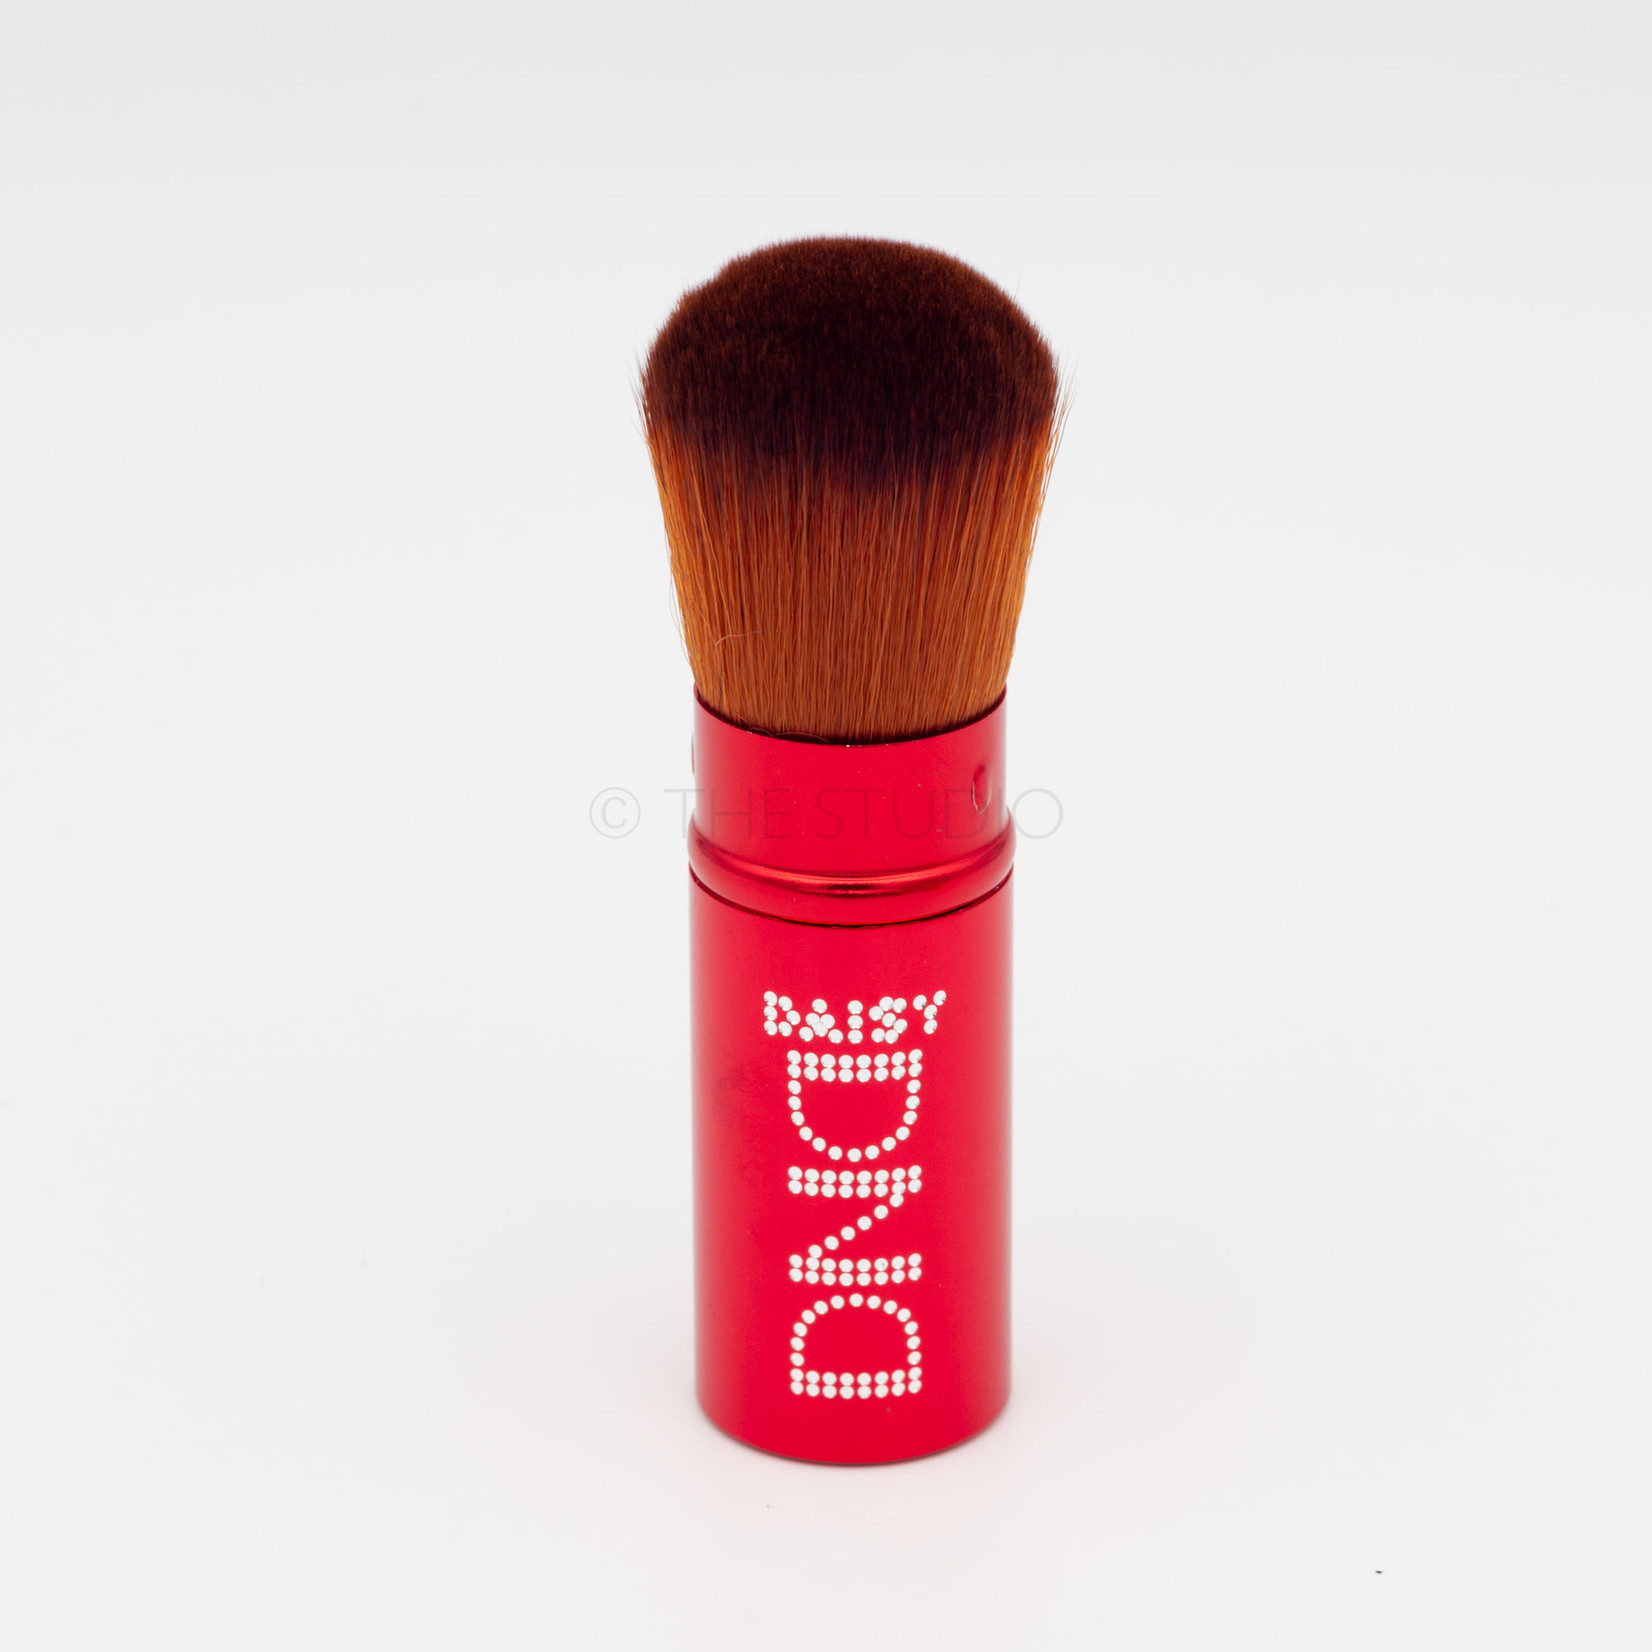 DND DND - Nail Dust Brush - Red - Large